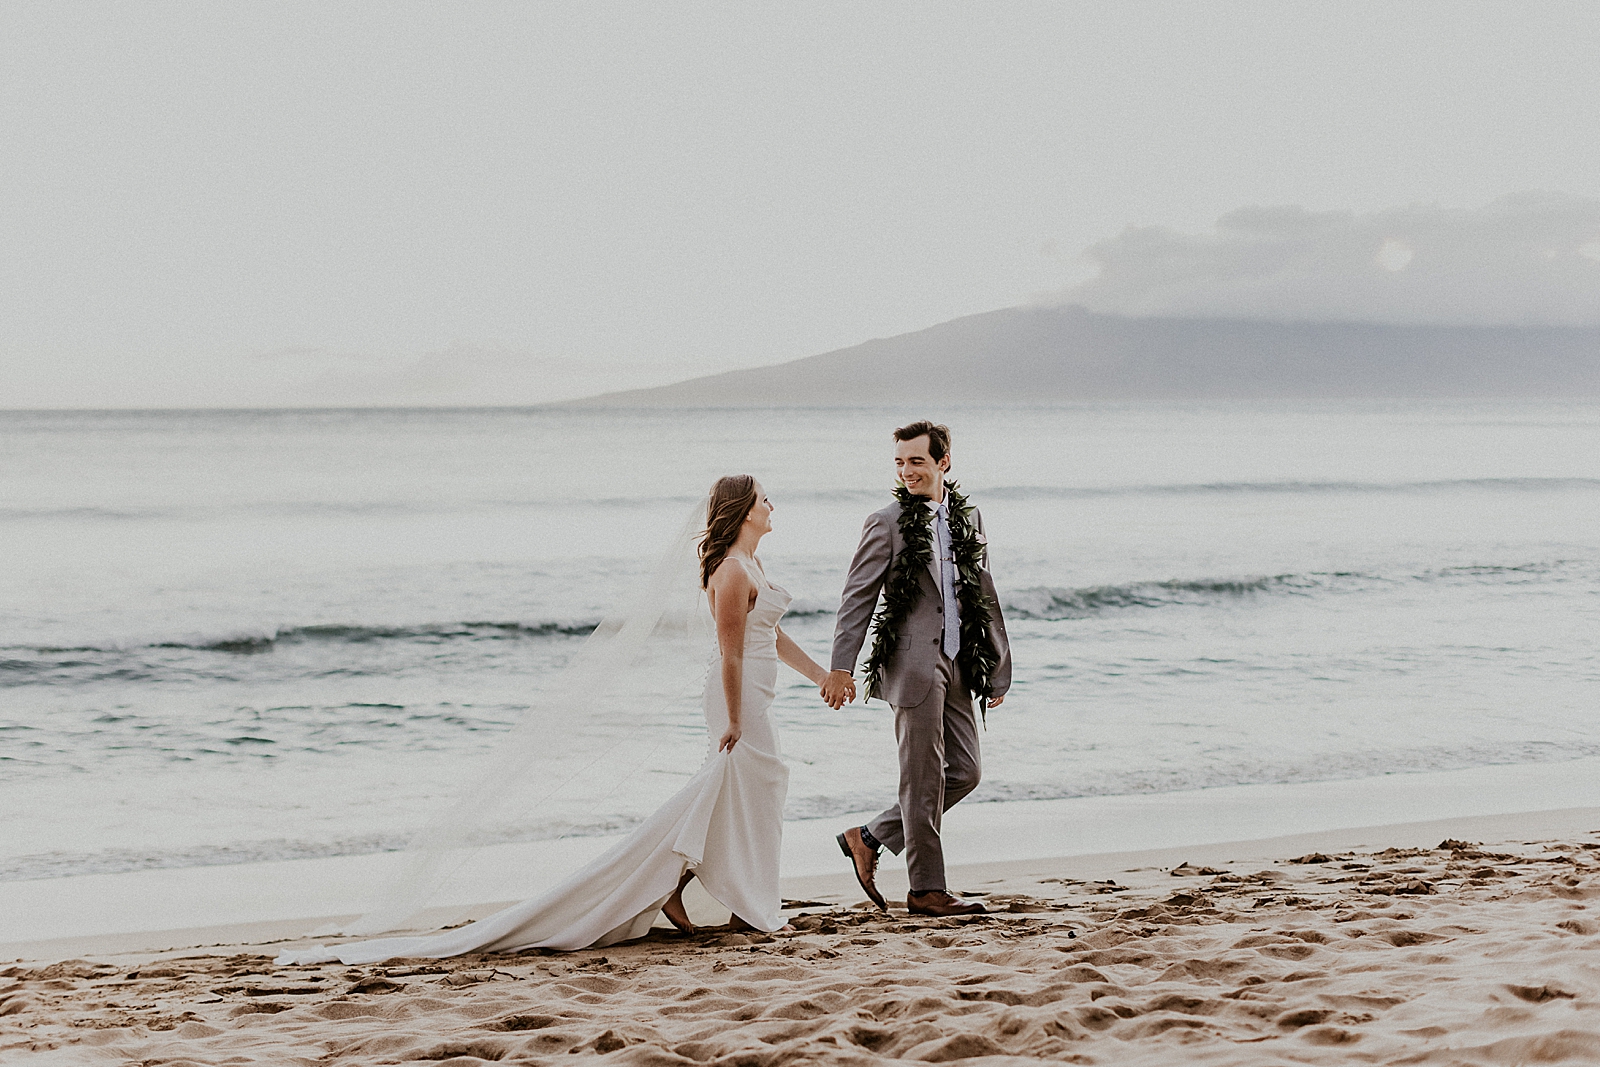 Bride and Groom holding hands and walking by the ocean on the beach